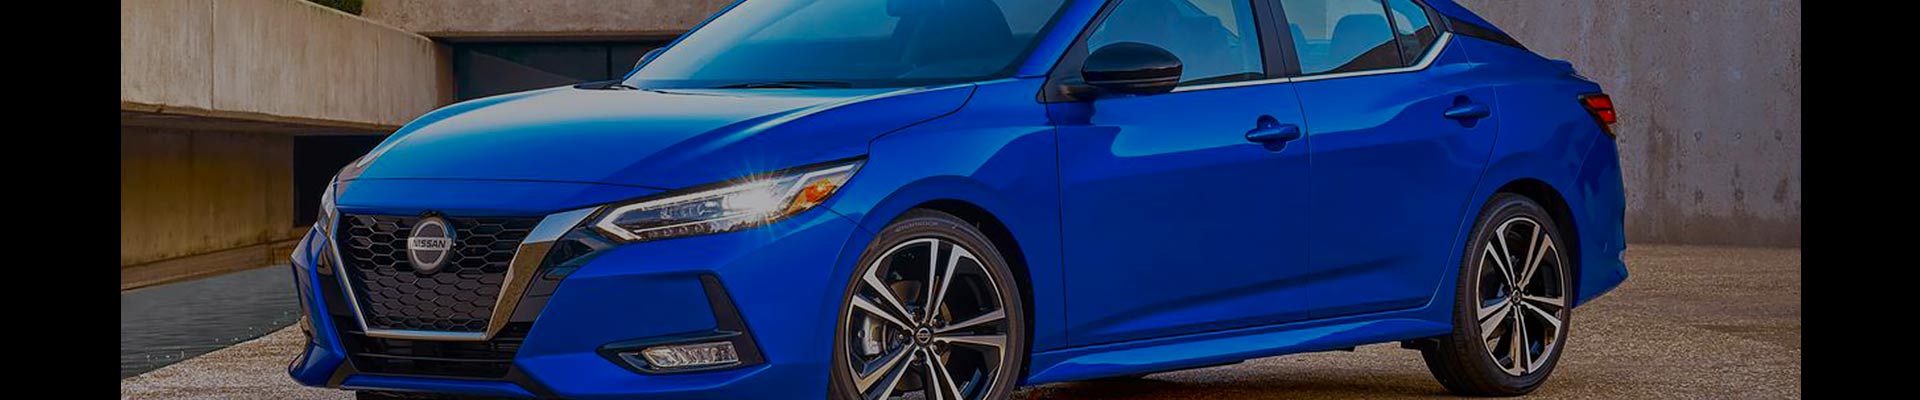 Shop Replacement and OEM Nissan Sentra Parts with Discounted Price on the Net